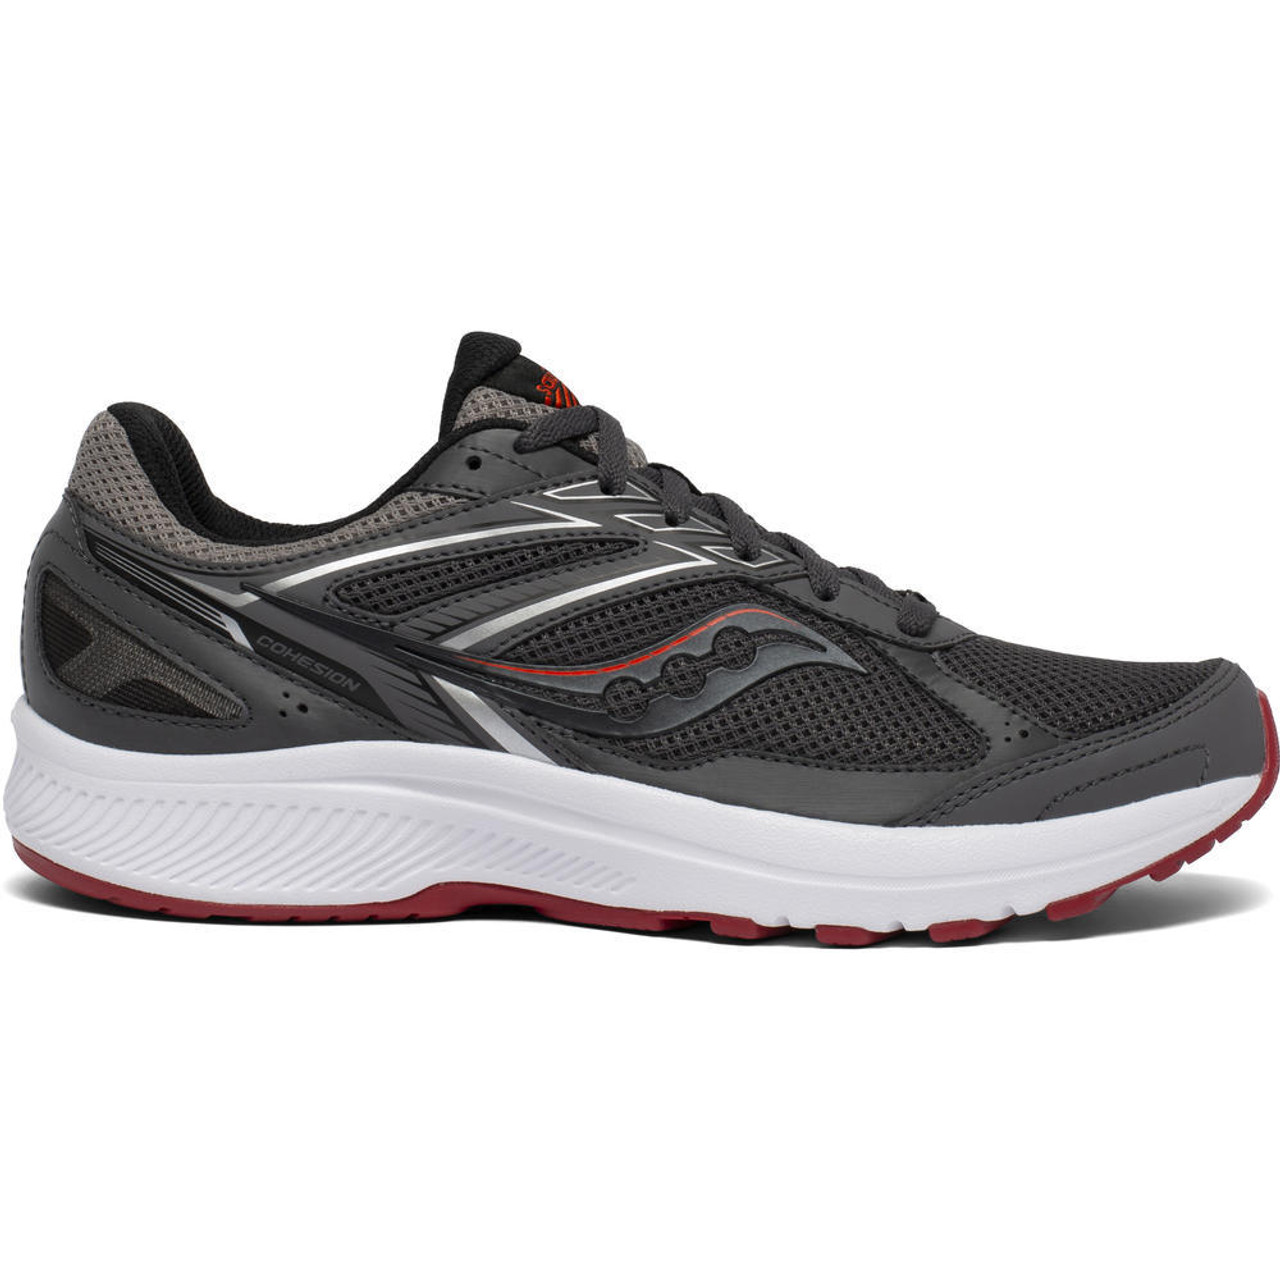 Saucony Cohesion 14 Men's Running Shoes Charcoal Red